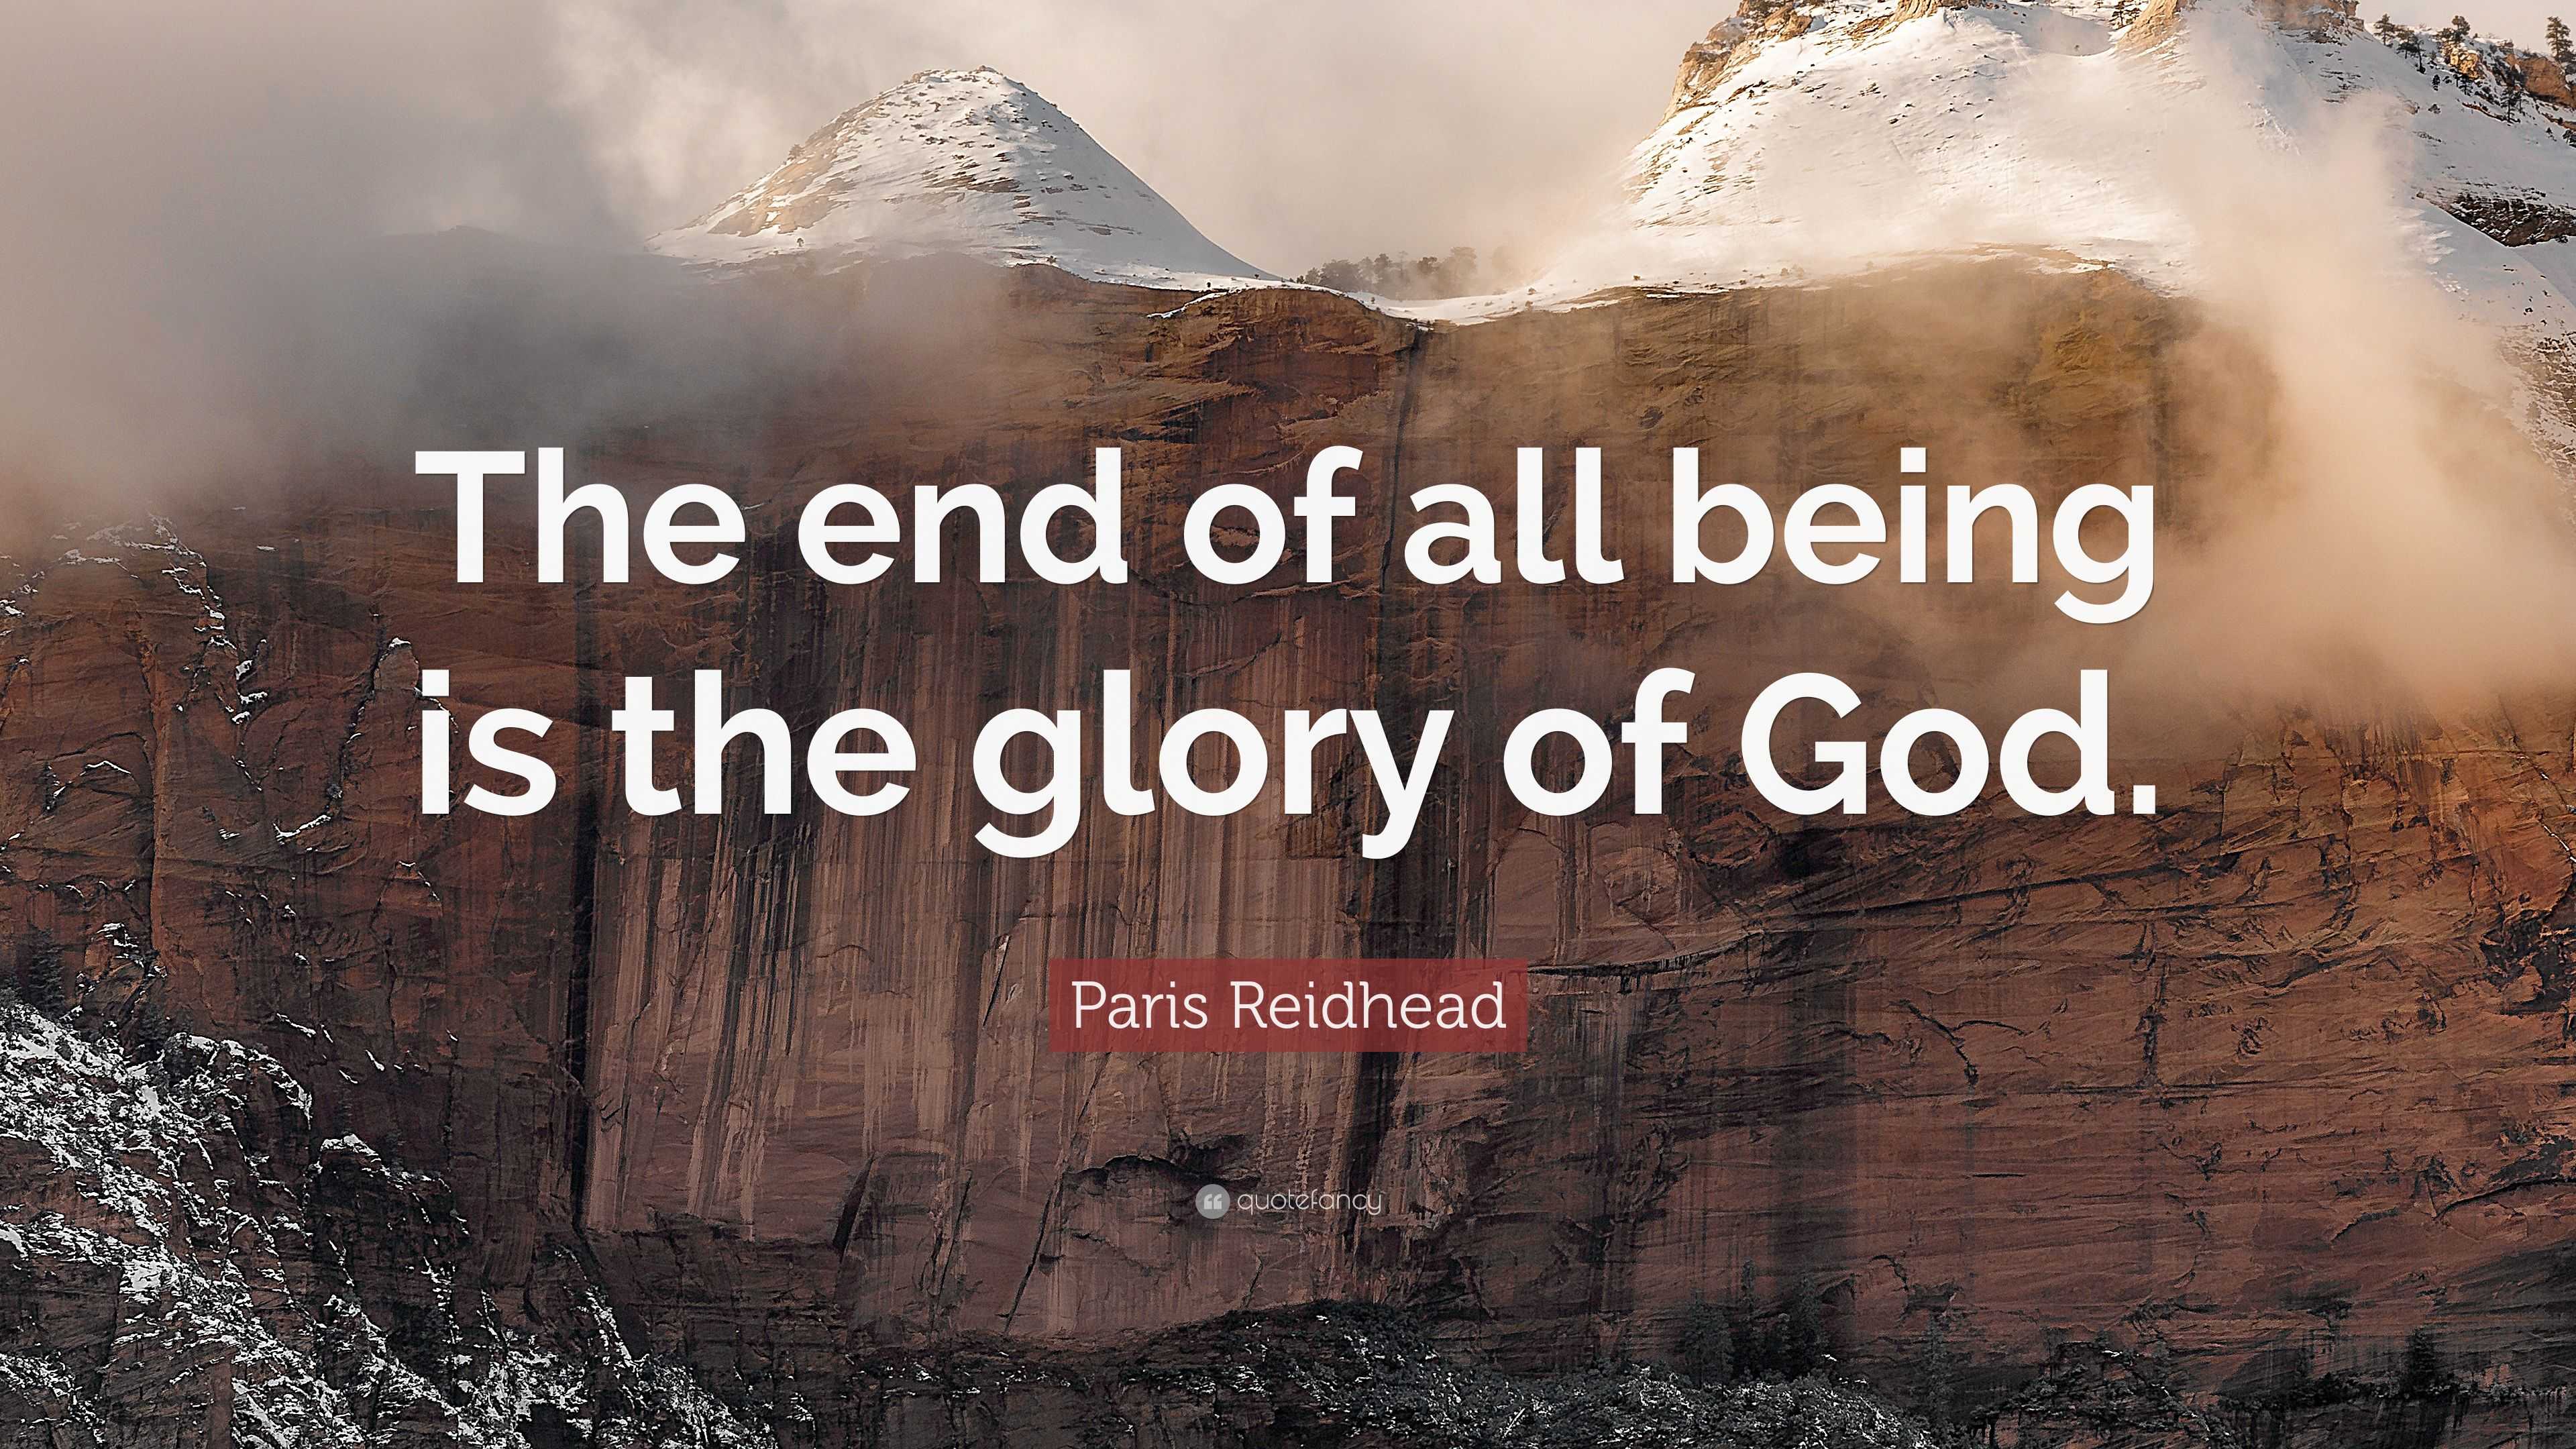 Paris Reidhead Quote: “The end of all being is the glory of God.” (9